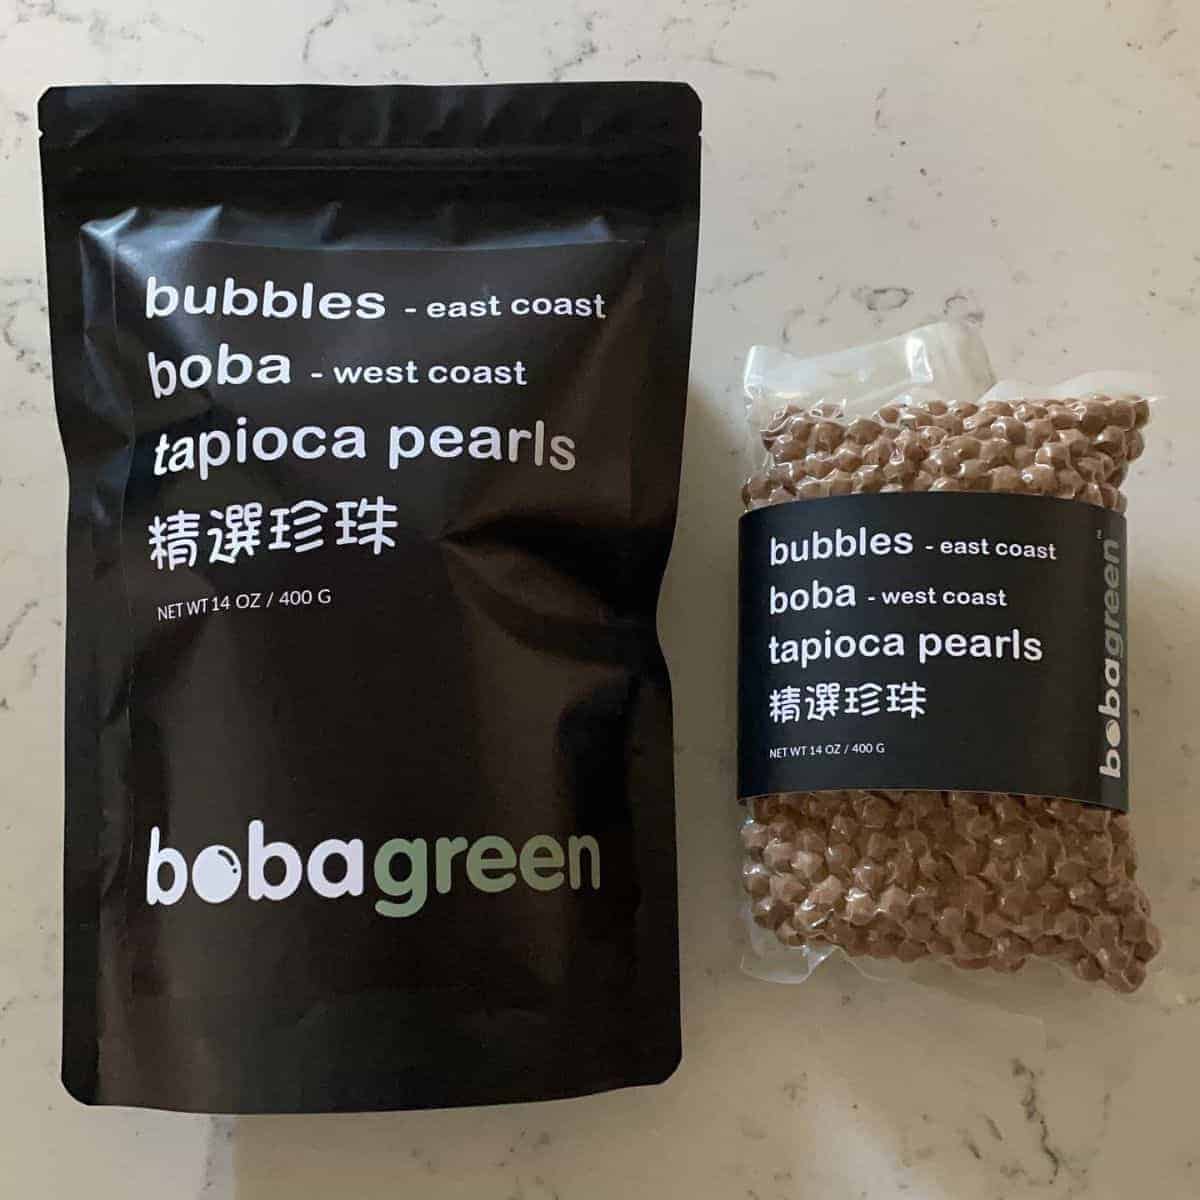 Brown tapioca pearls from Boba Green in two packages